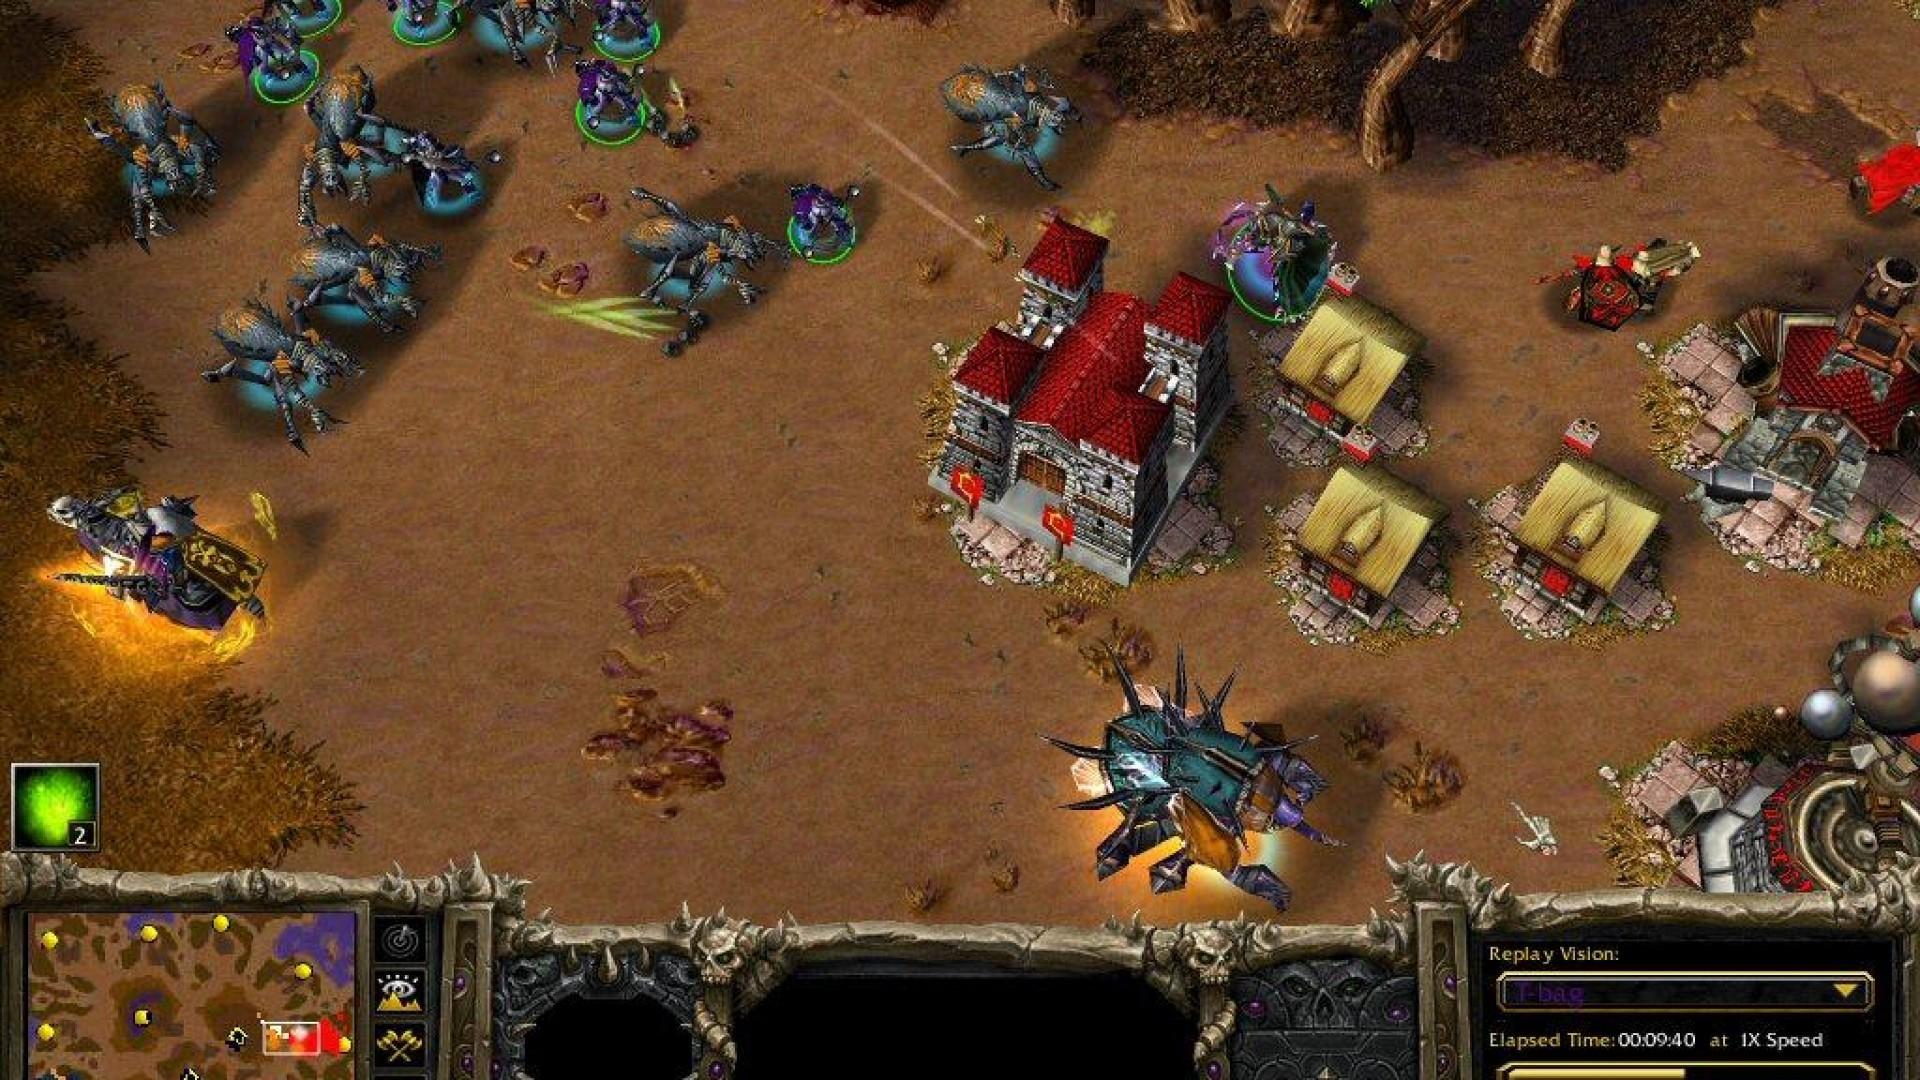 warcraft 3 was unable to initialize directx